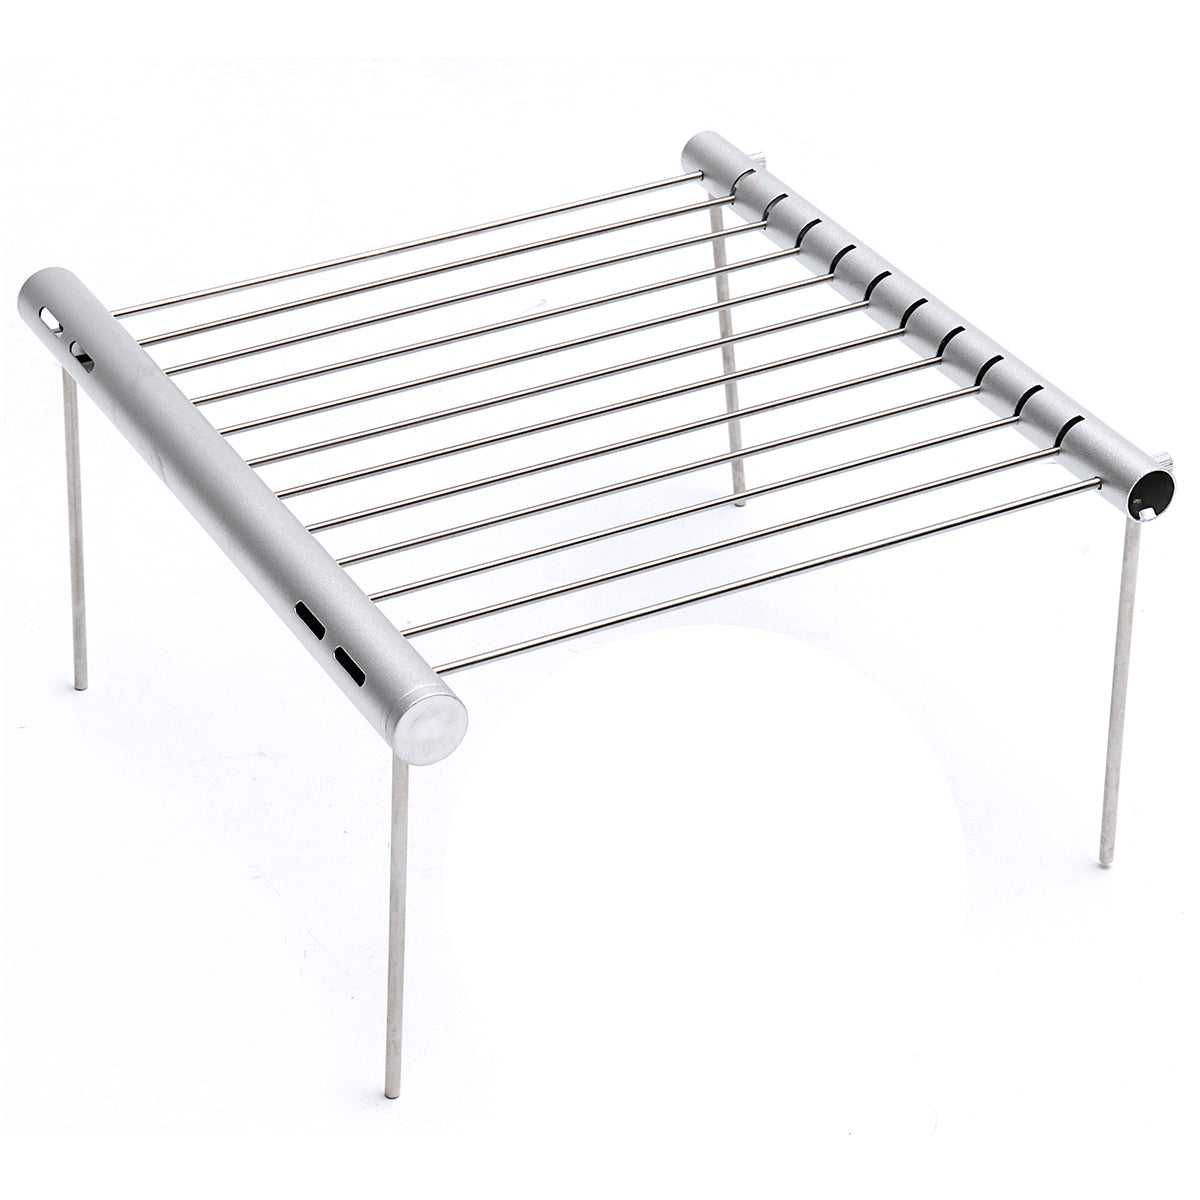 Outdoor Portable Folding Stainless Steel Barbecue Grill Camping Picnic BBQ Rack